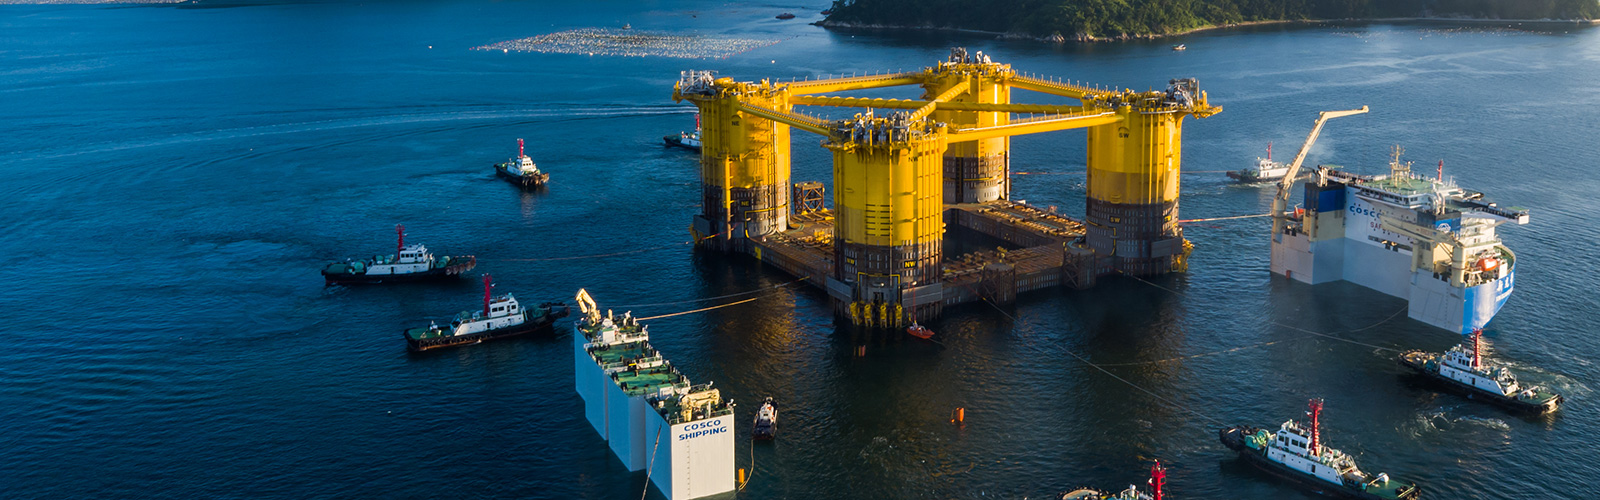 The Appomattox project hull is prepared for its journey from Geoje, South Korea to Ingleside, Texas, USA, to complete the semi-submersible host platform’s construction.